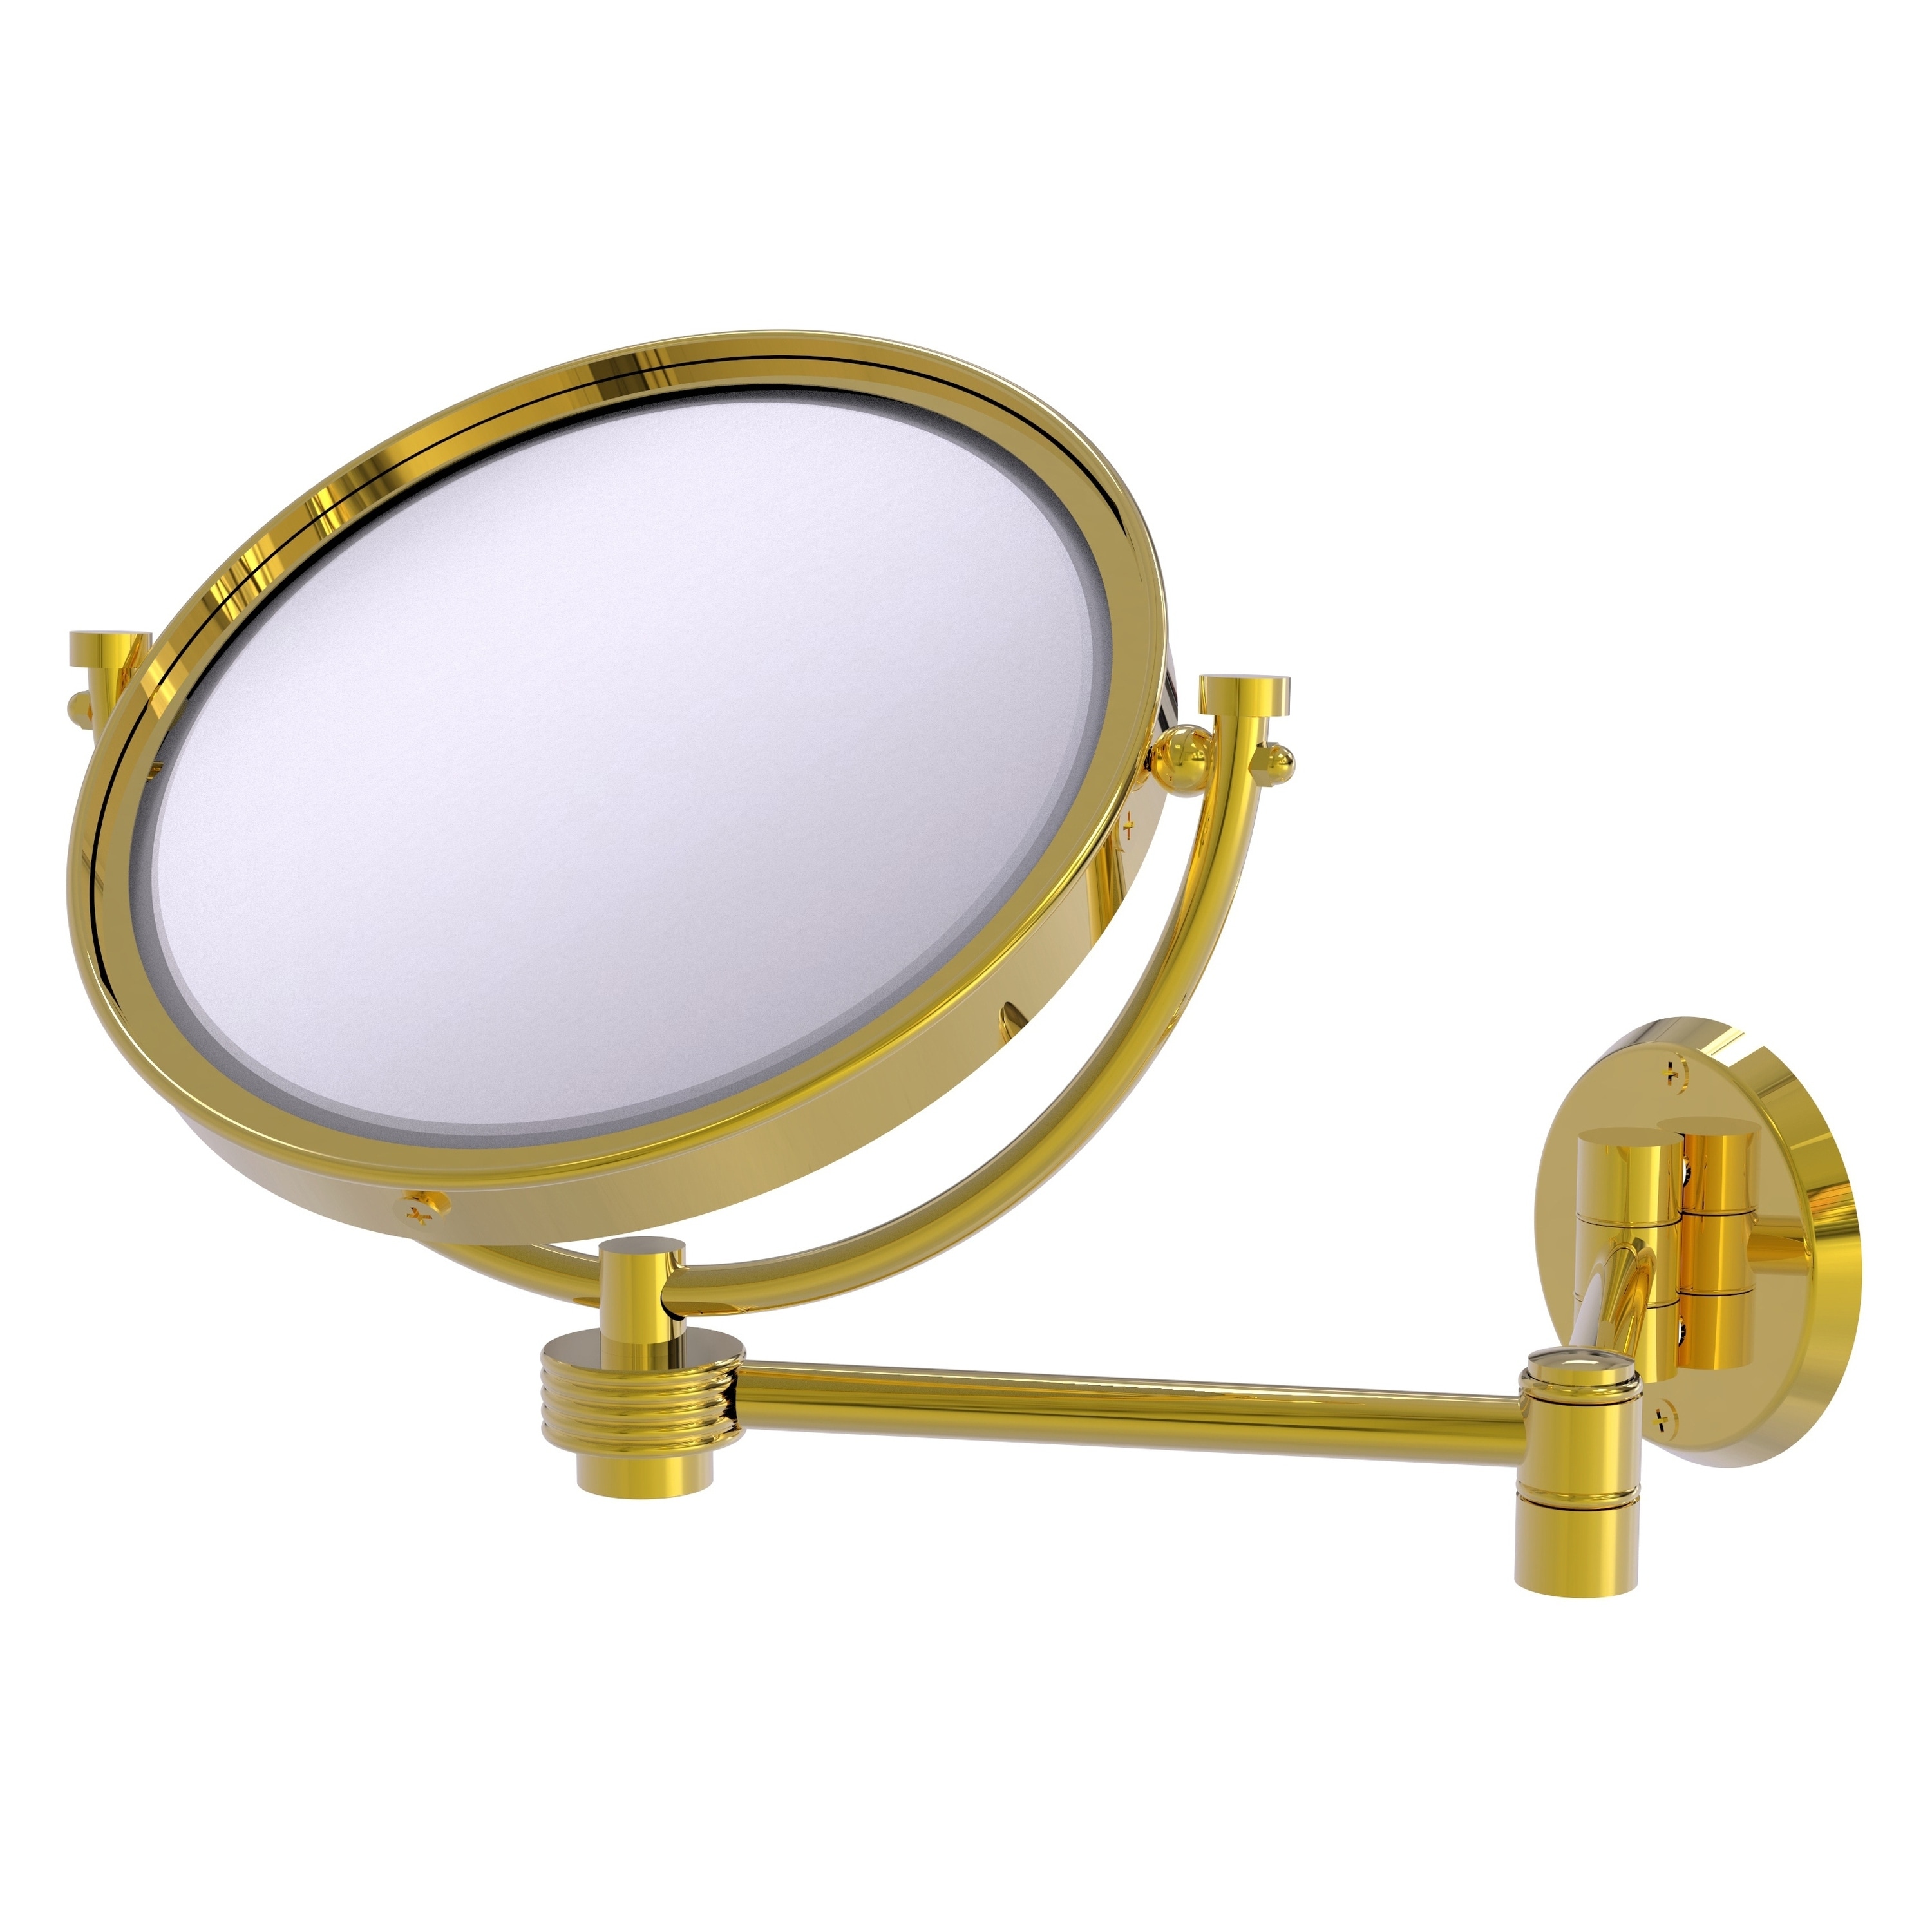 8-in x 10-in Polished Silver Double-sided 2X Magnifying Wall-mounted Vanity Mirror | - Allied Brass WM-6G/2X-PB